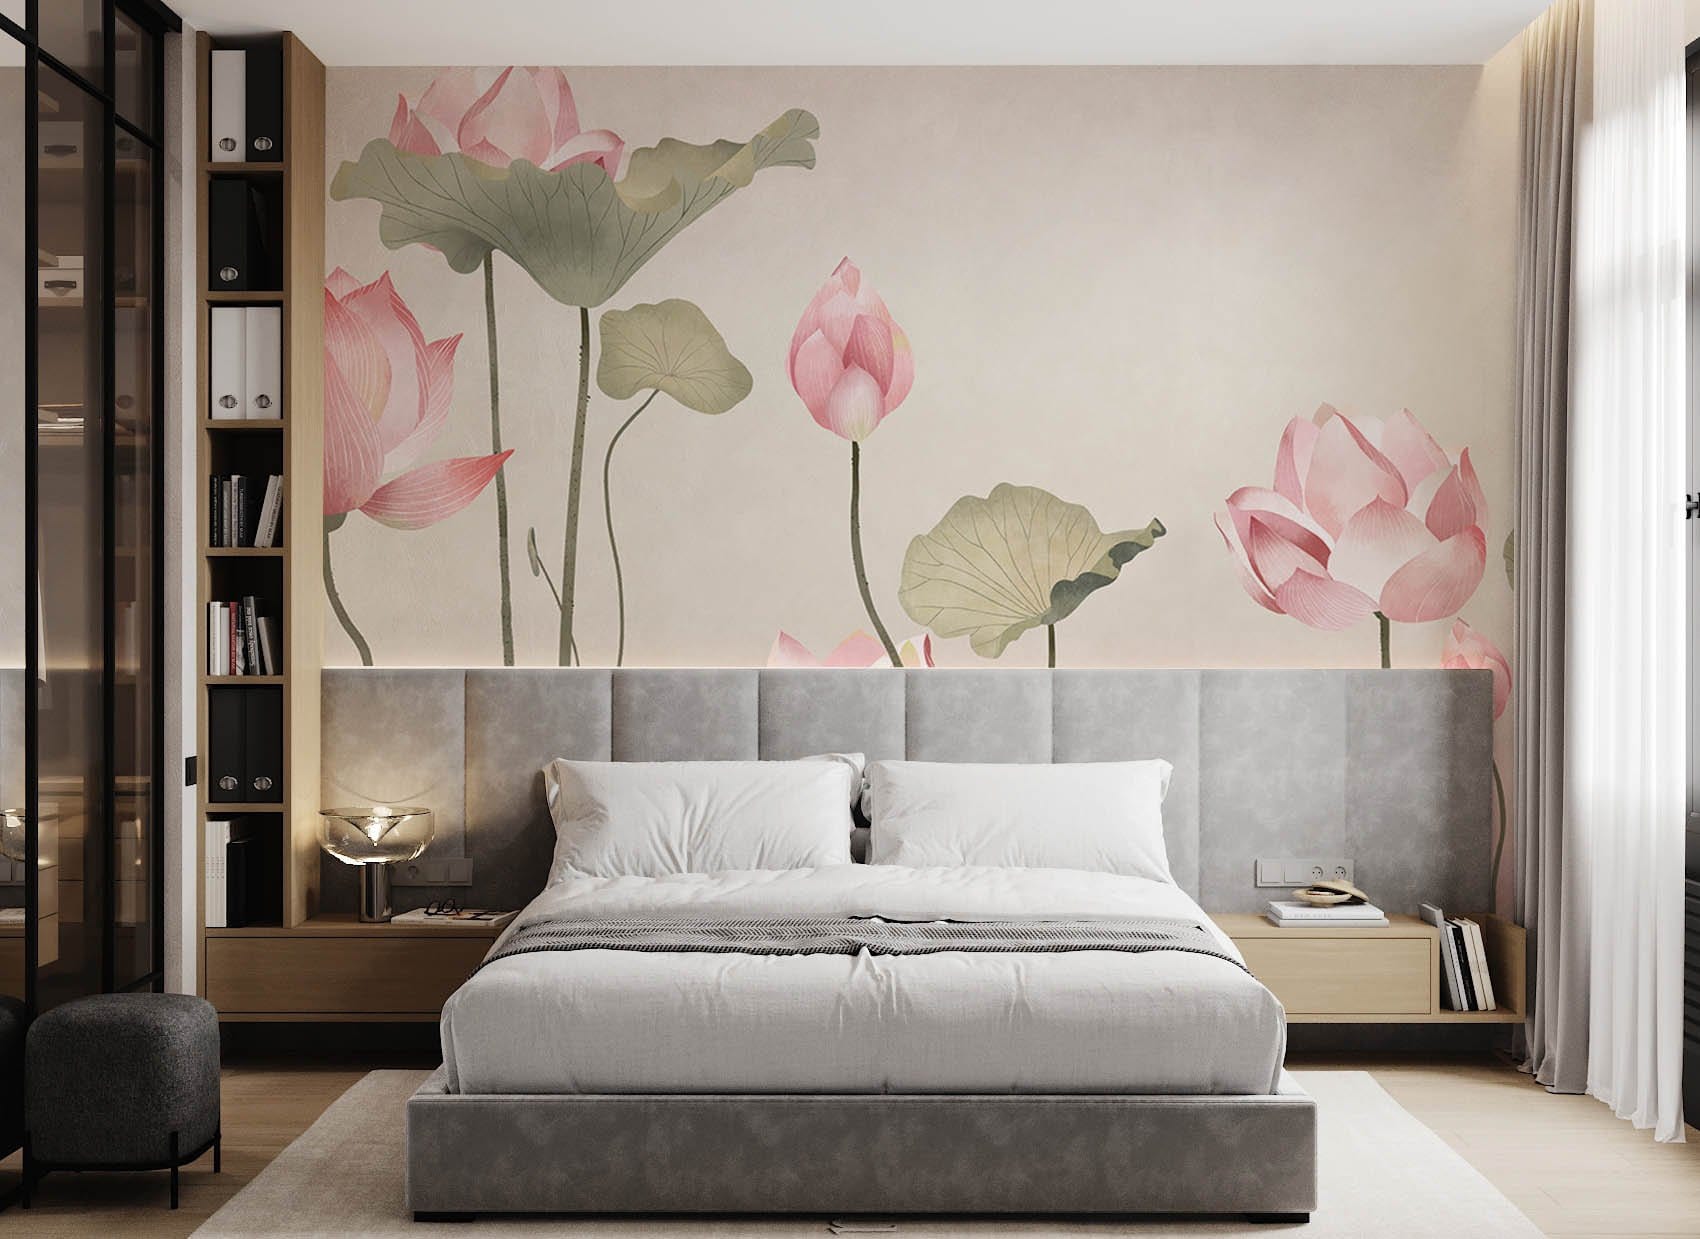 Wallpaper mural with a lotus flower design, ideal for use in bedrooms